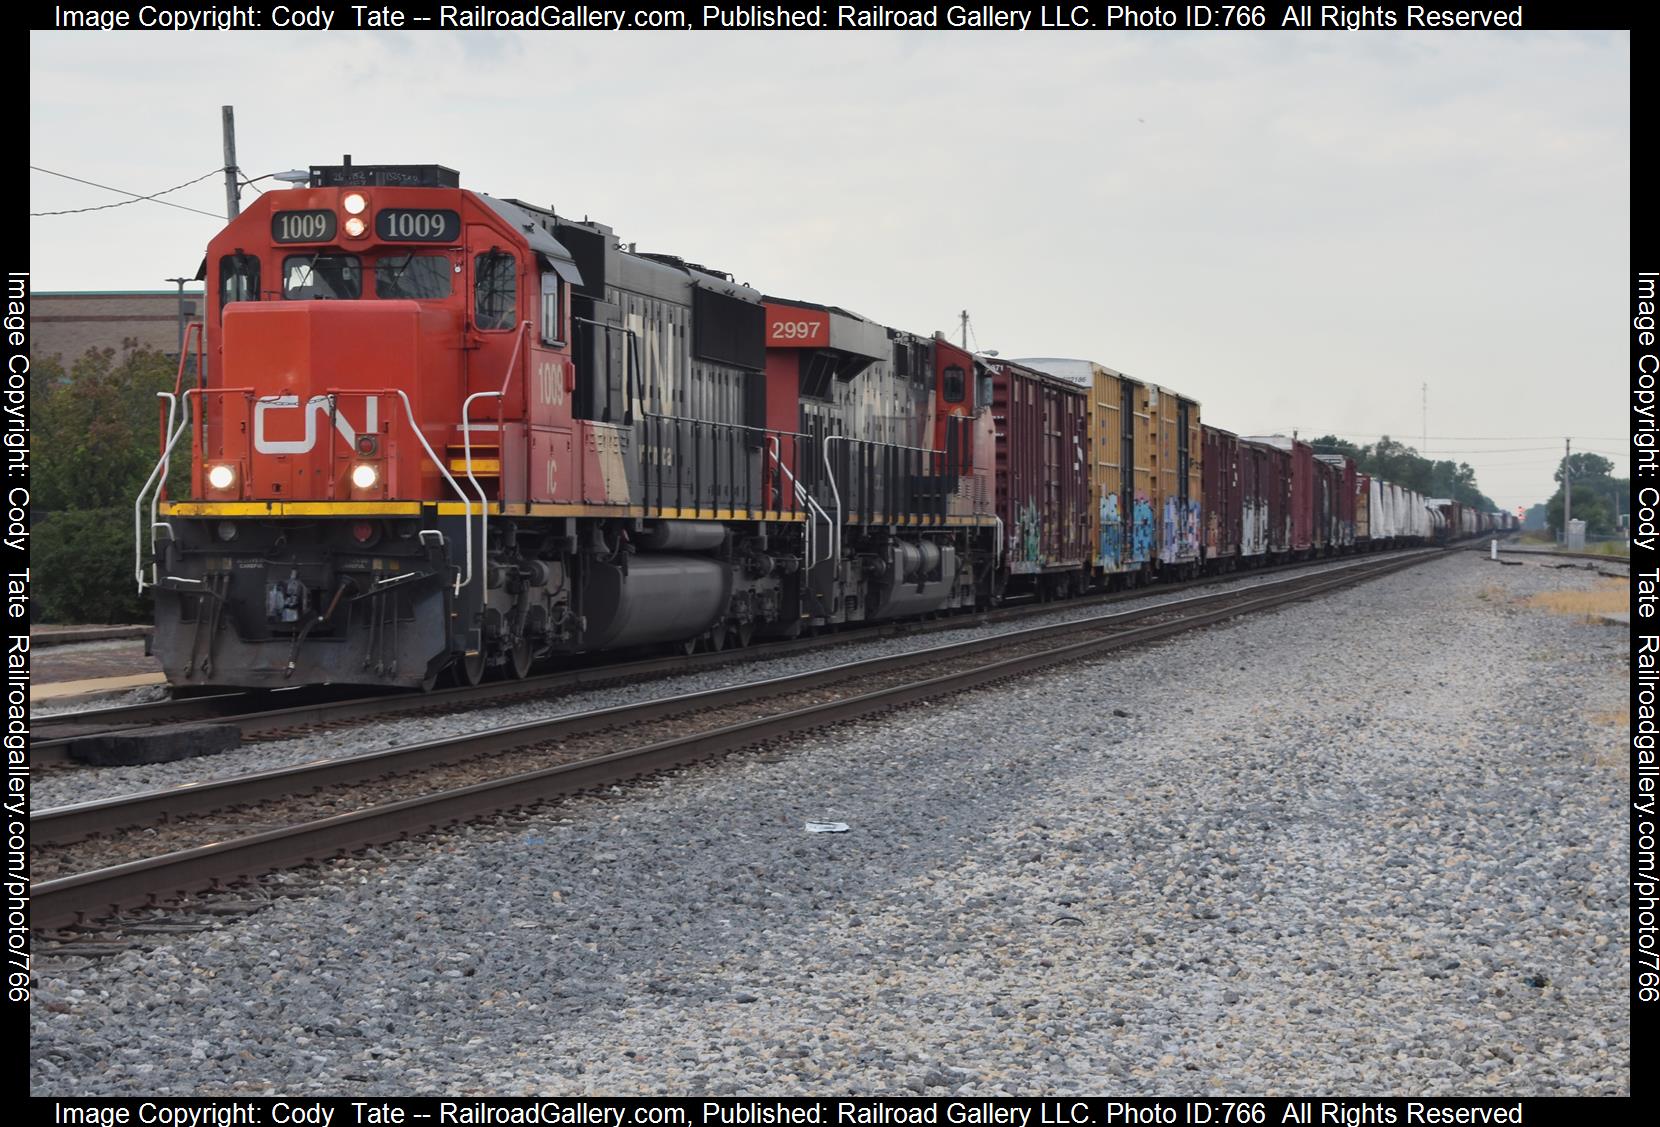 IC 1009 is a class EMD SD70 and  is pictured in Centralia, Illinois, USA.  This was taken along the Centralia subdivision  on the Canadian National Railway. Photo Copyright: Cody  Tate uploaded to Railroad Gallery on 02/26/2023. This photograph of IC 1009 was taken on Saturday, September 10, 2022. All Rights Reserved. 